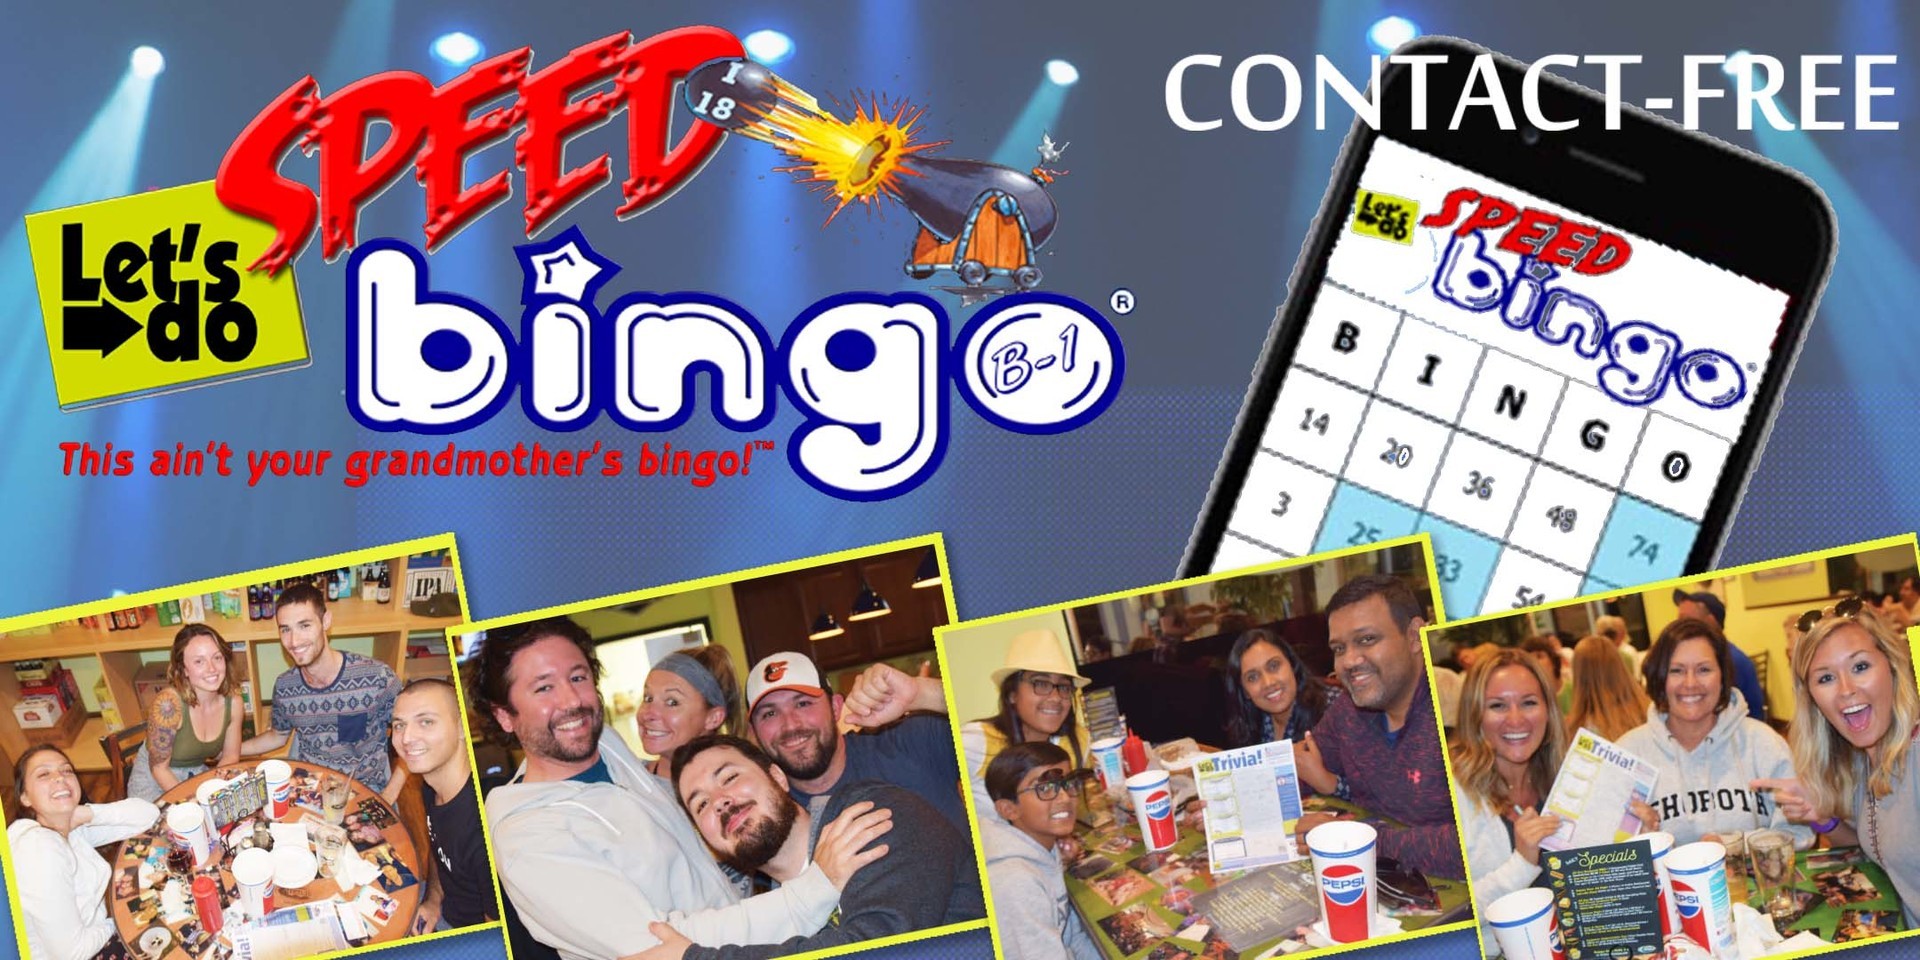 BINGO - Free to play, Virtual Card for Contact-Free Play, Rehoboth Beach, Delaware, United States